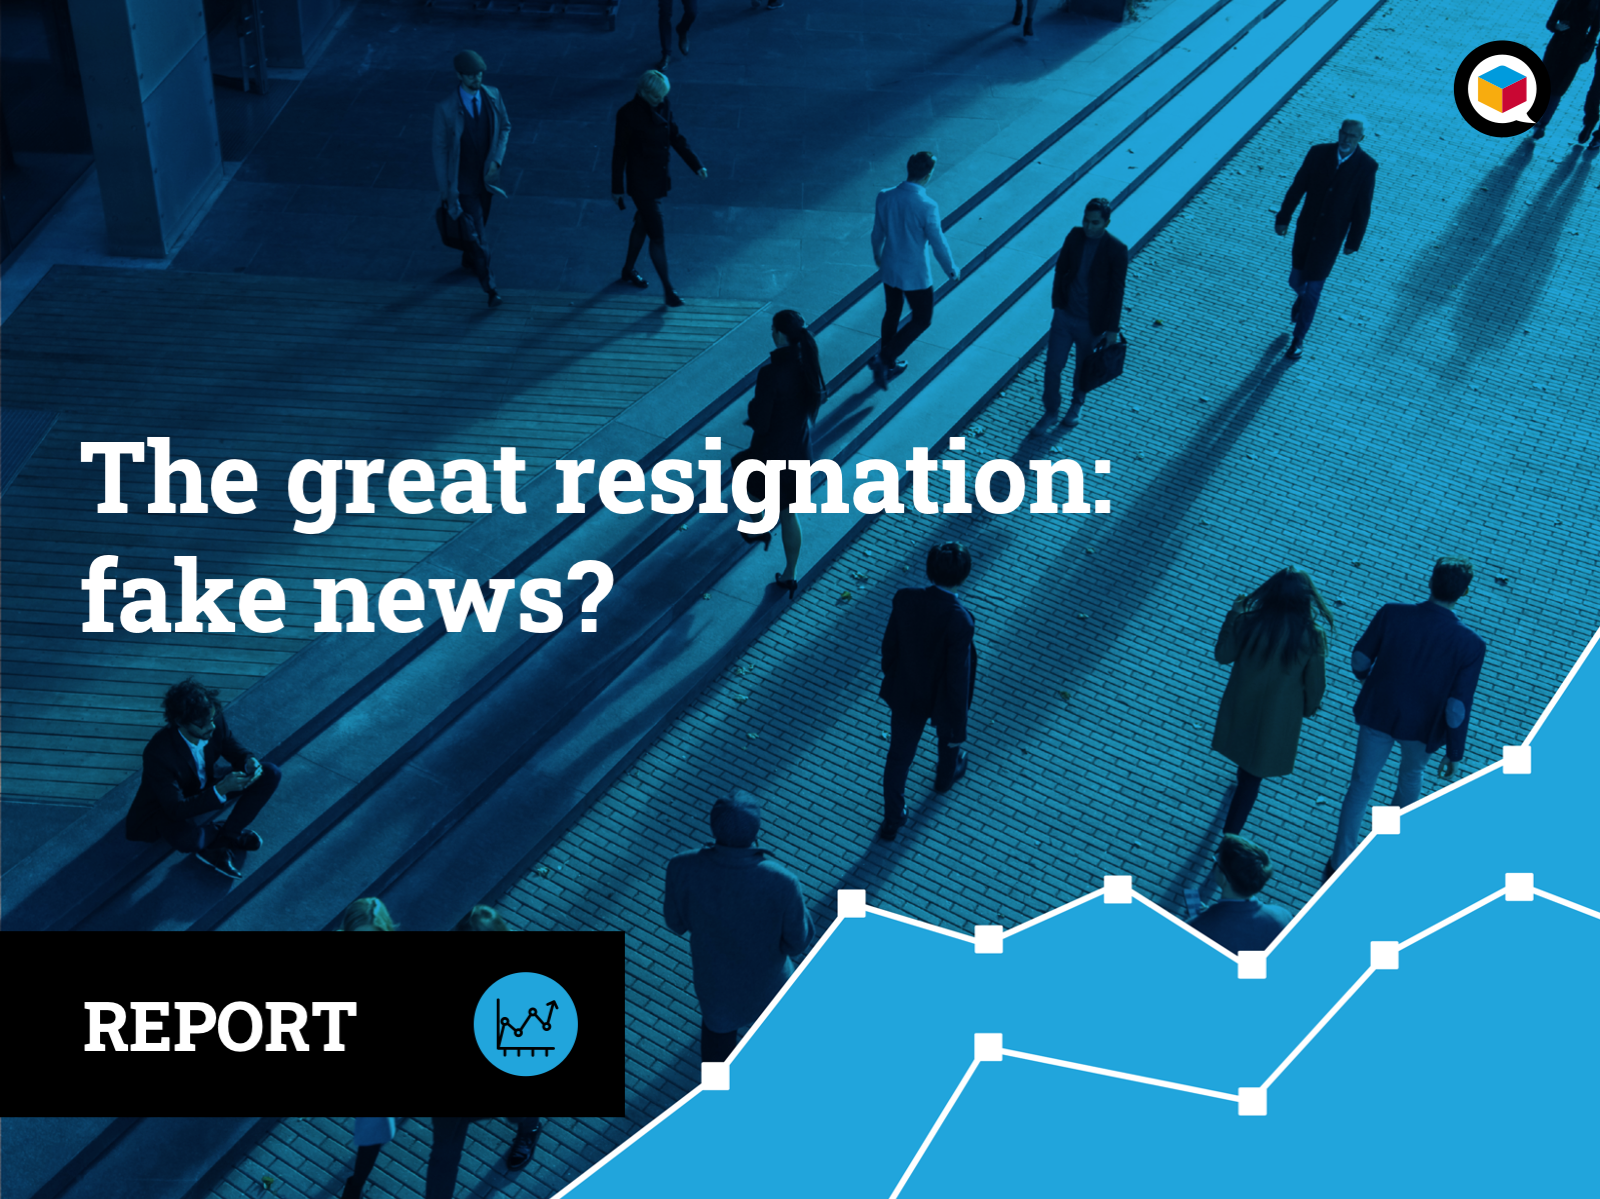 The great resignation: fake news? What the data says about the real-world trends behind the headlines